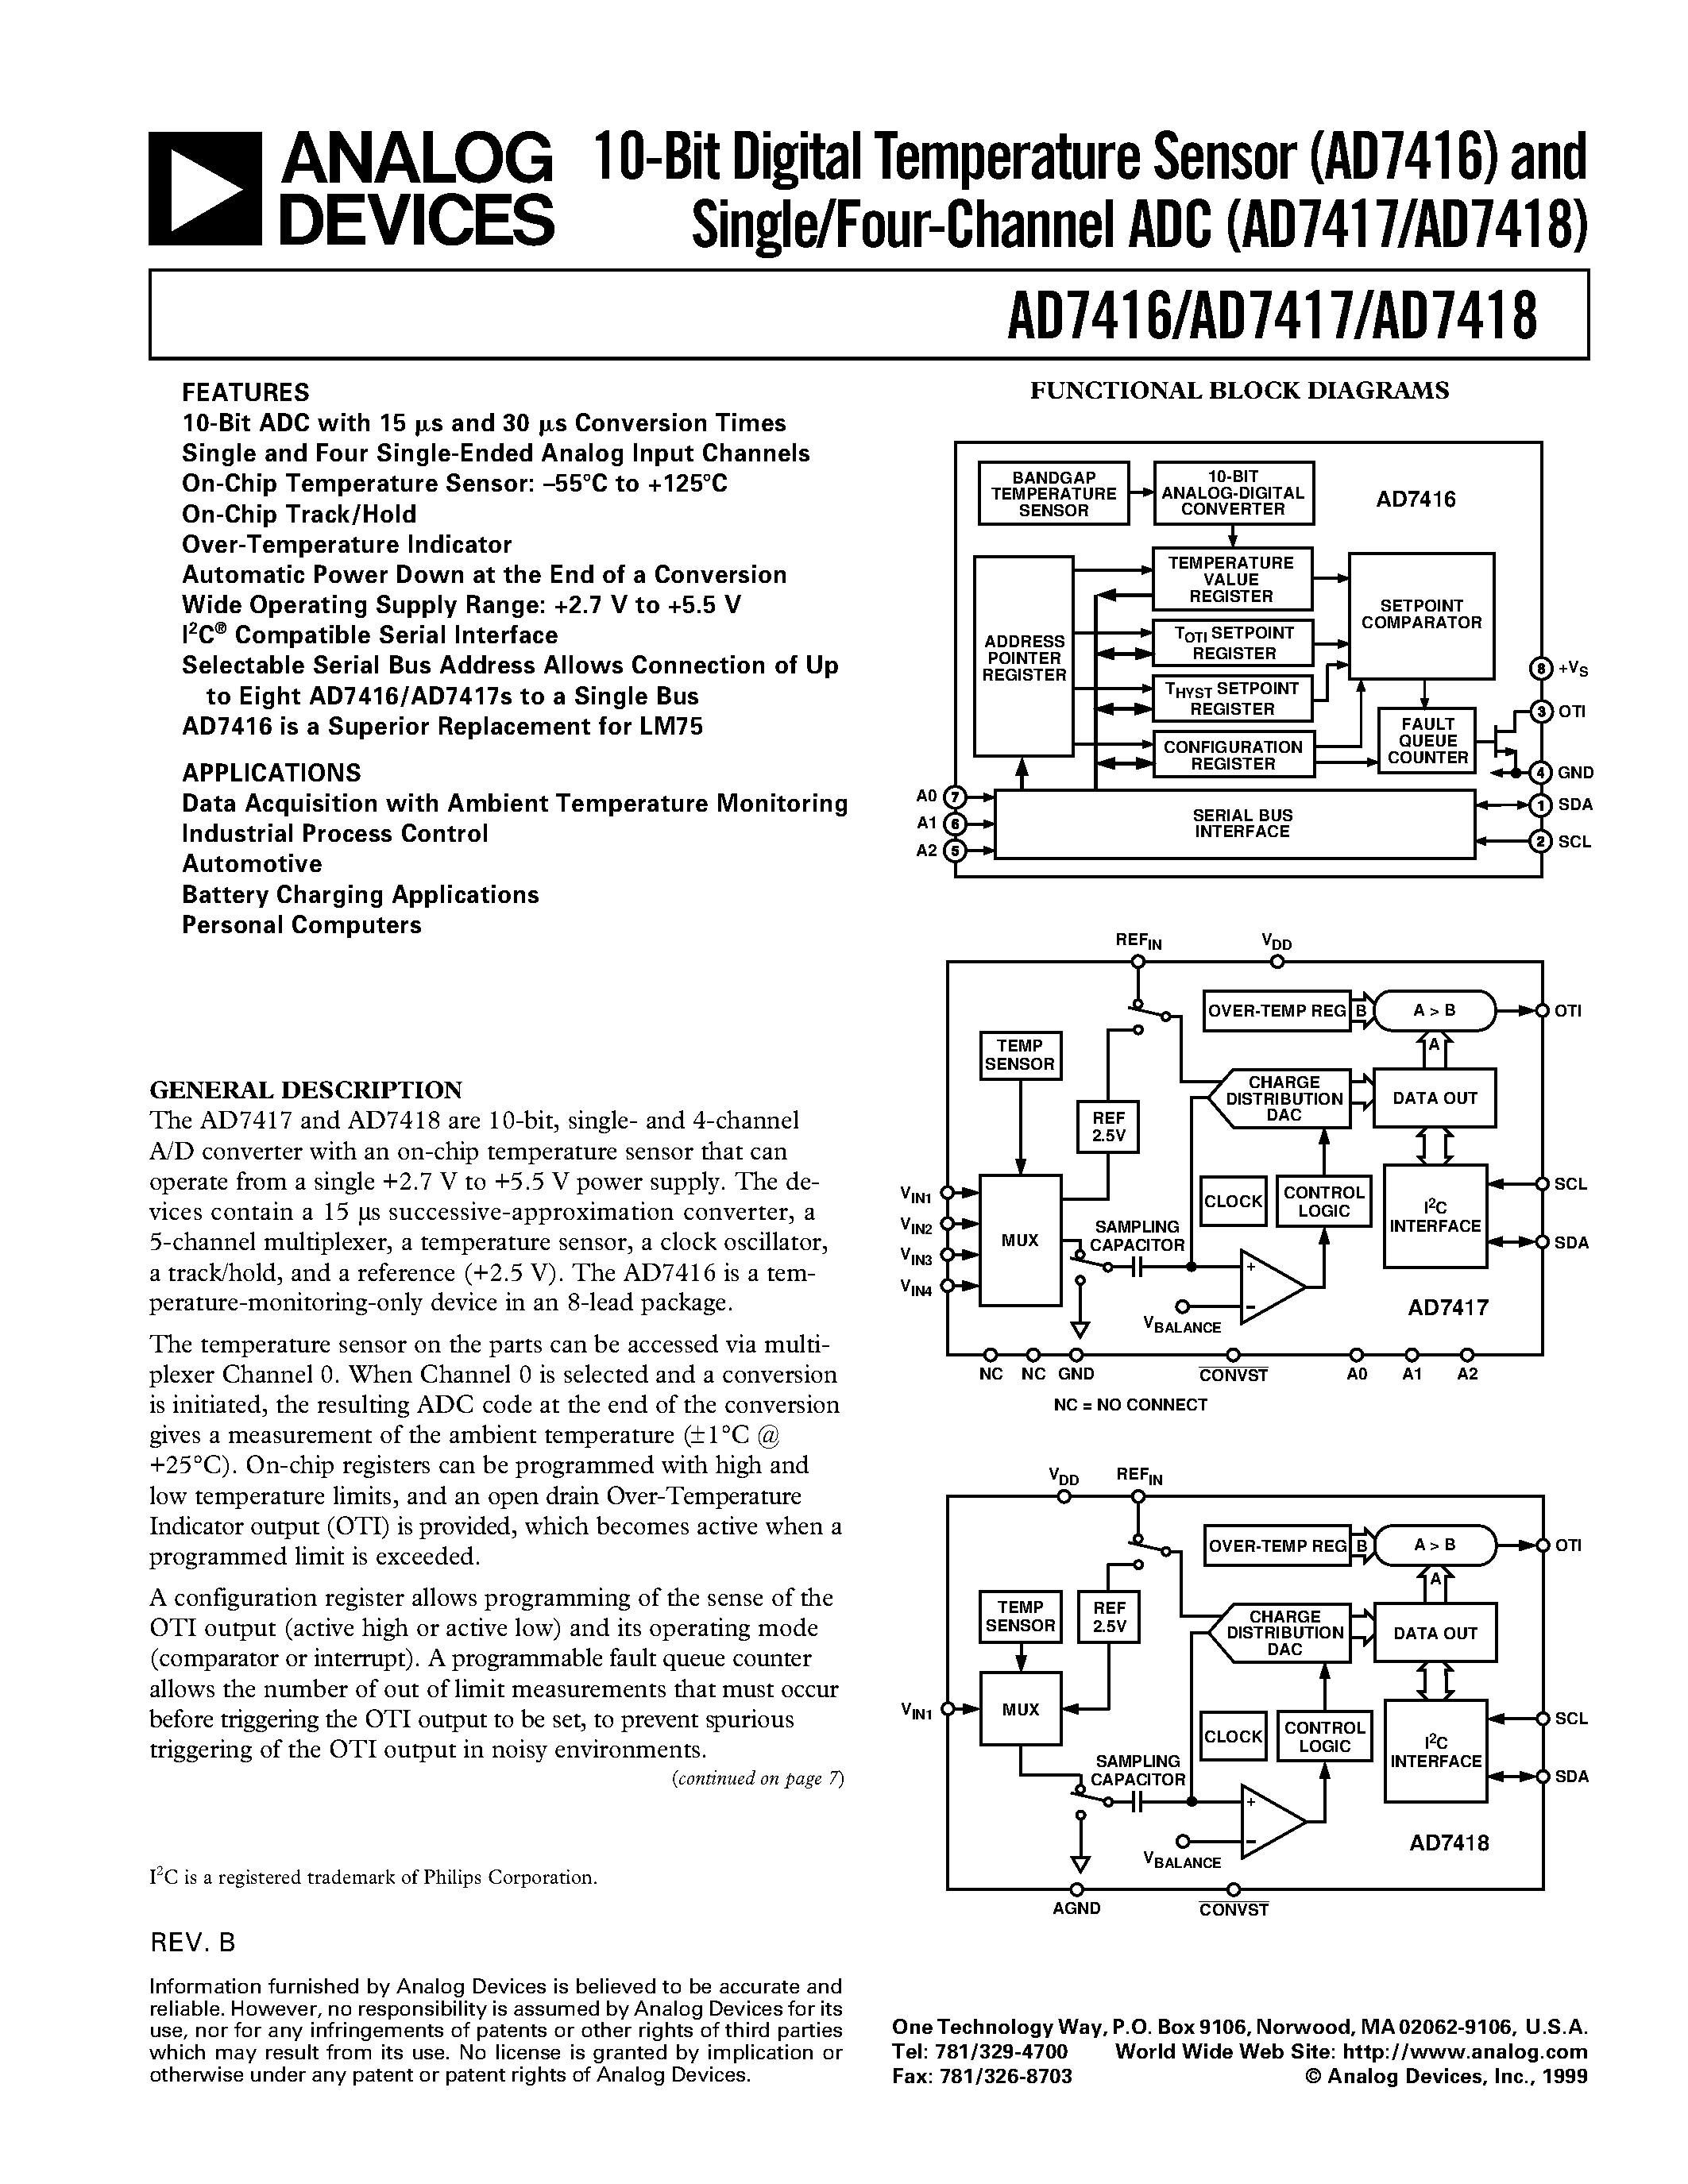 Datasheet AD7416-7418 - 10-Bit Digital Temperature Sensor (AD7416) and Single/Four-Channel ADC (AD7417/AD7418) page 1